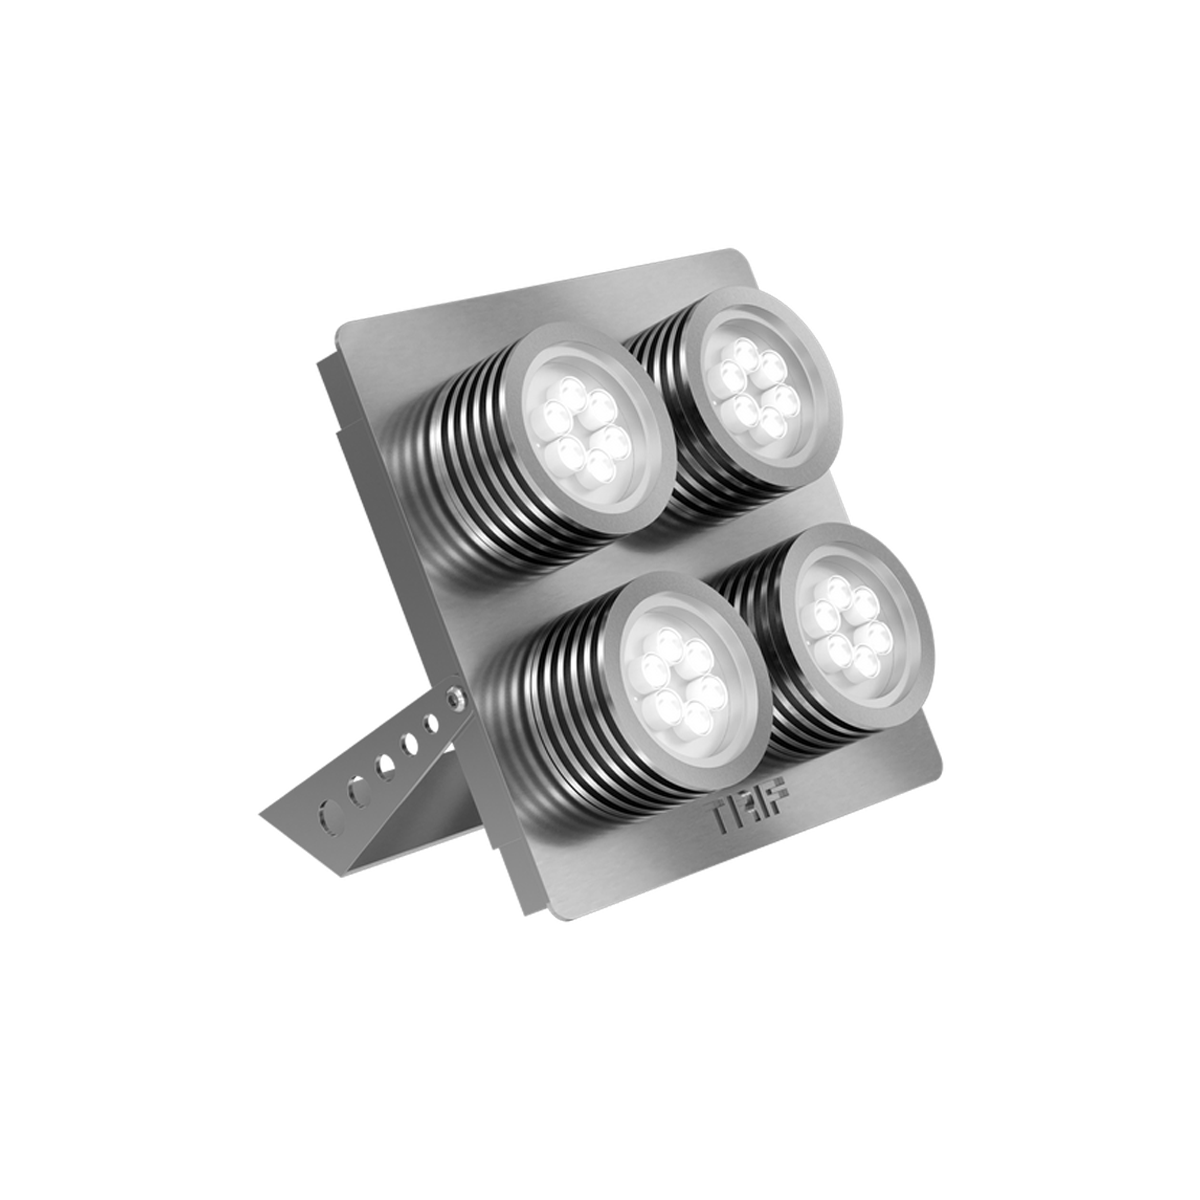 The series is specially designed for lighting of buildings TRIF FOCUS